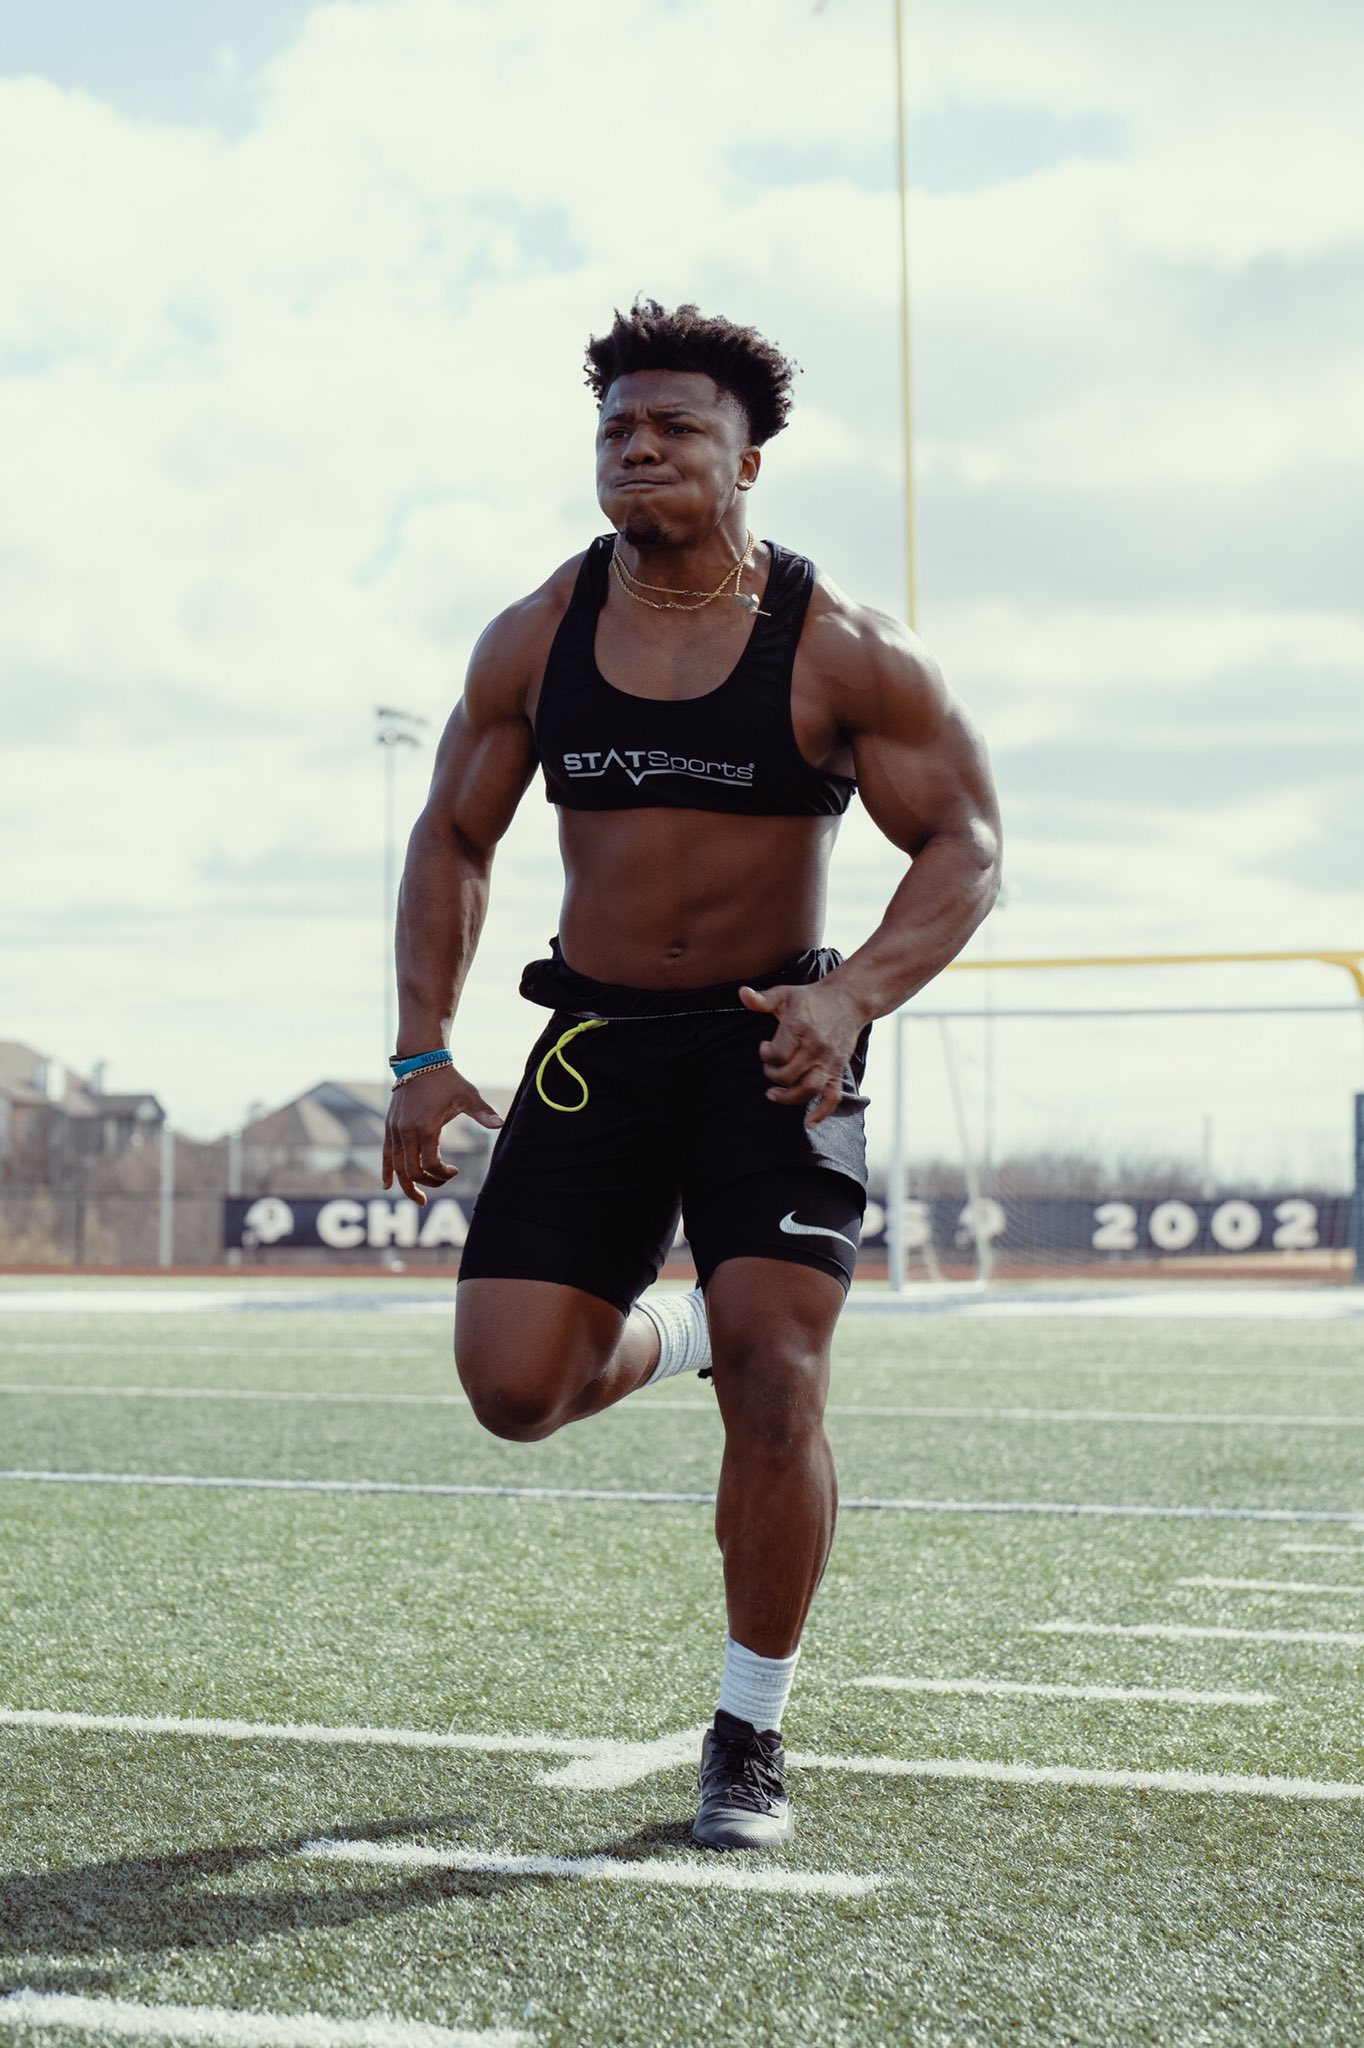 See Bryce Drummond's Official College Football Photos 2022